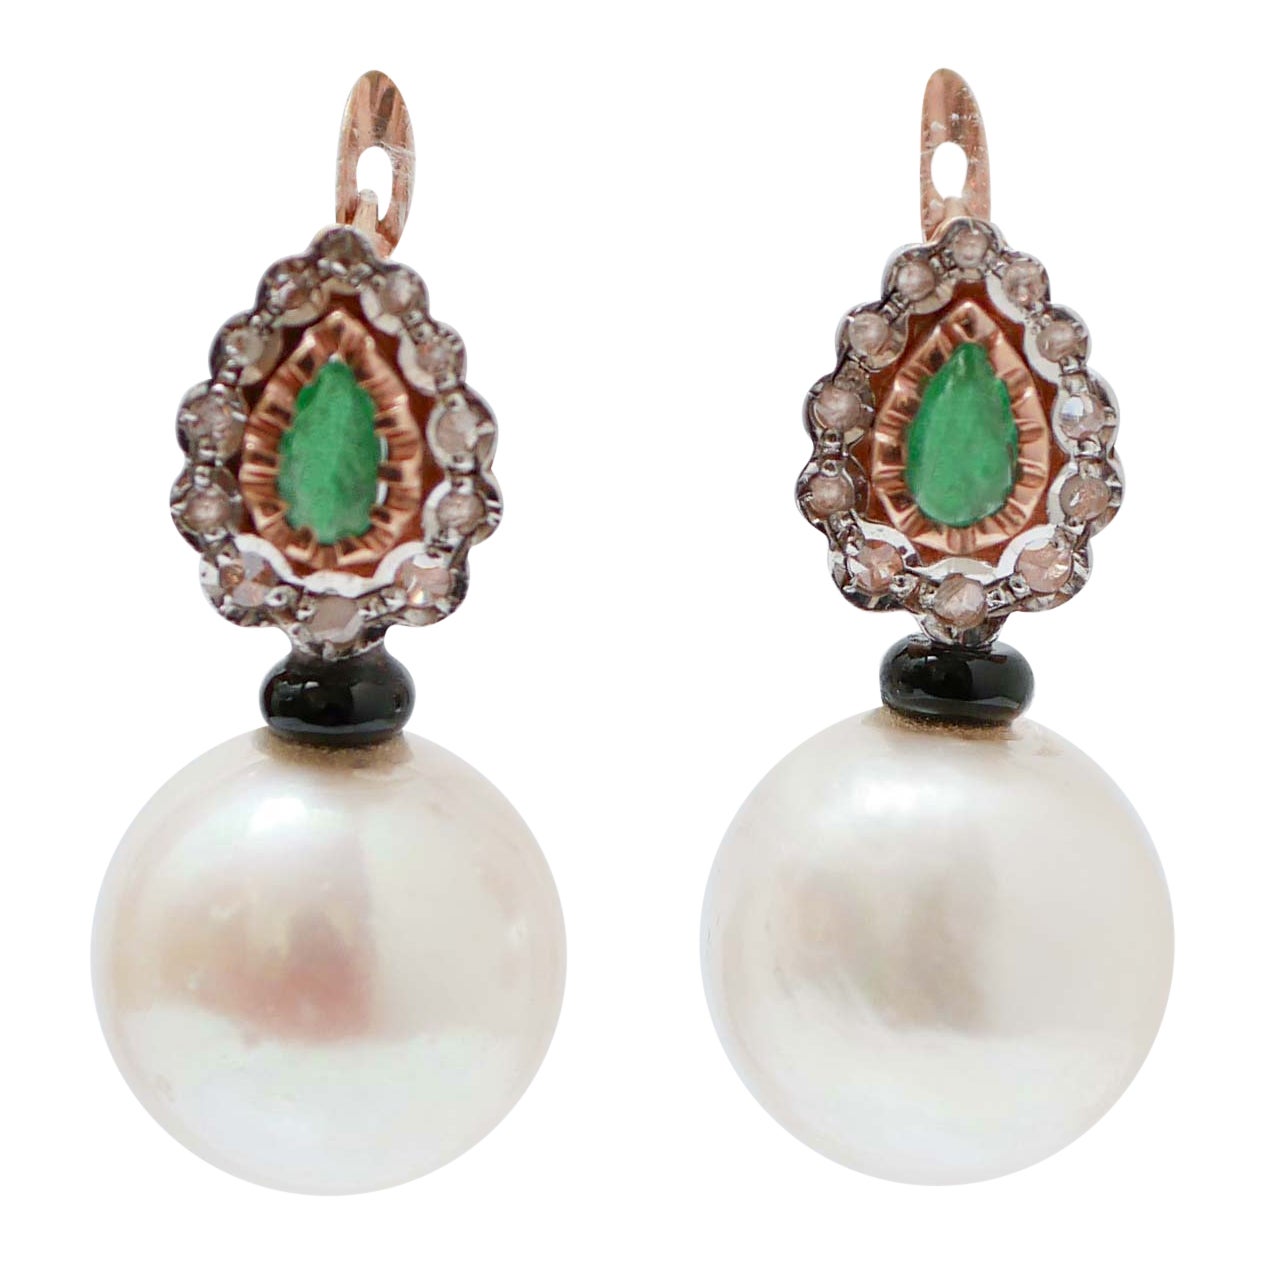 White Pearls, Emeralds, Diamonds, Onyx, Rose Gold and Silver Earrings.